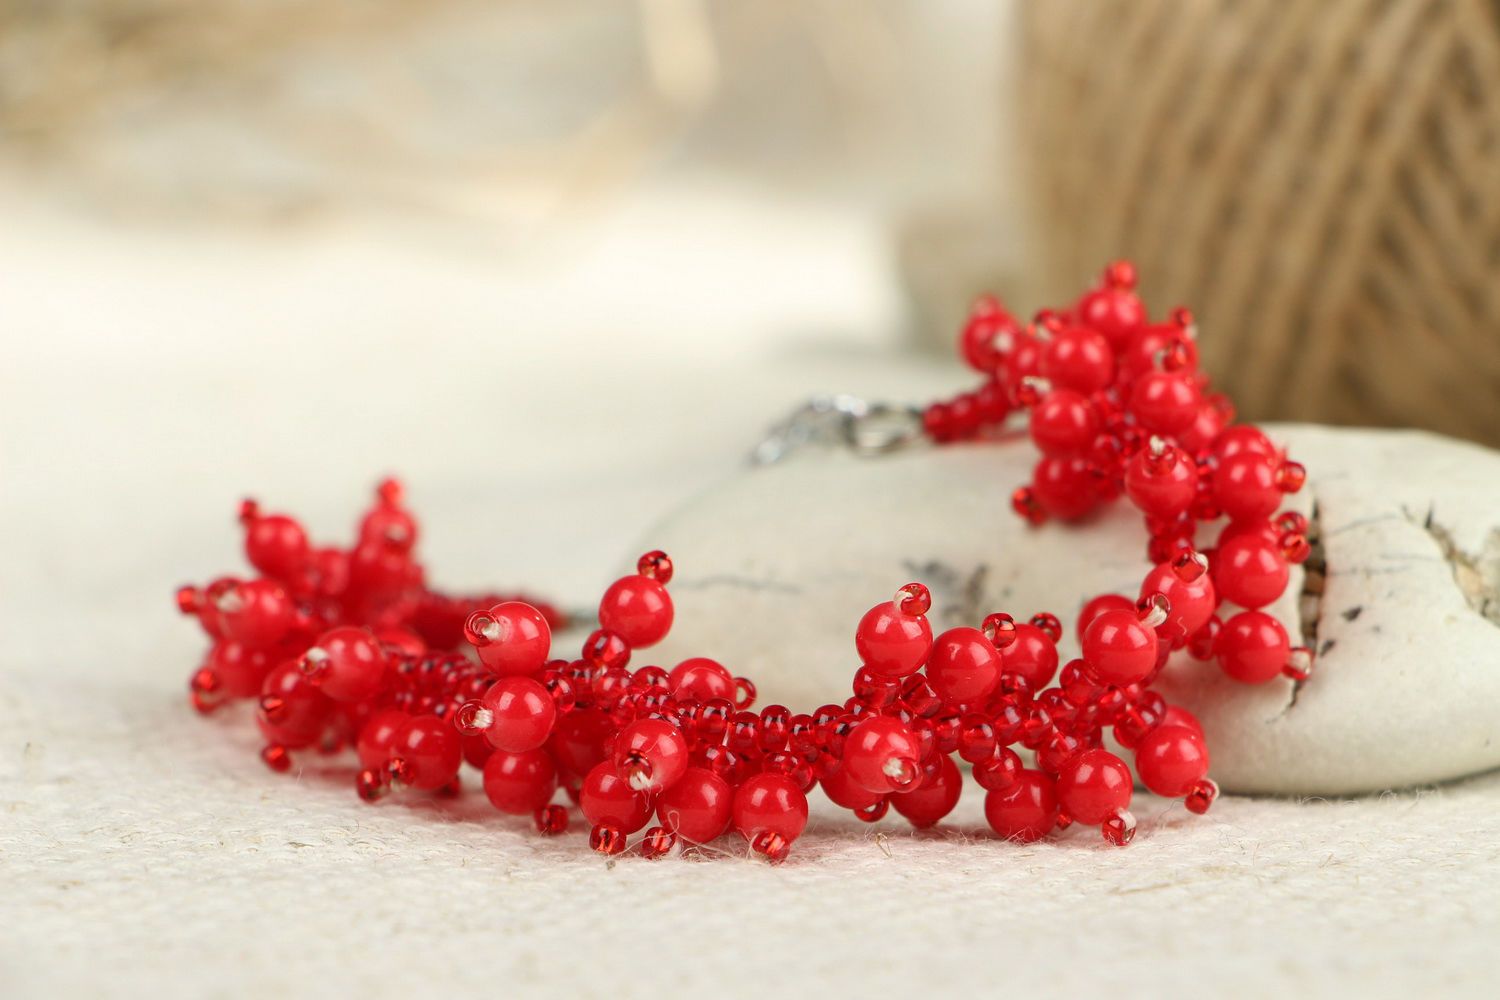 Bracelet with coral and beads photo 4